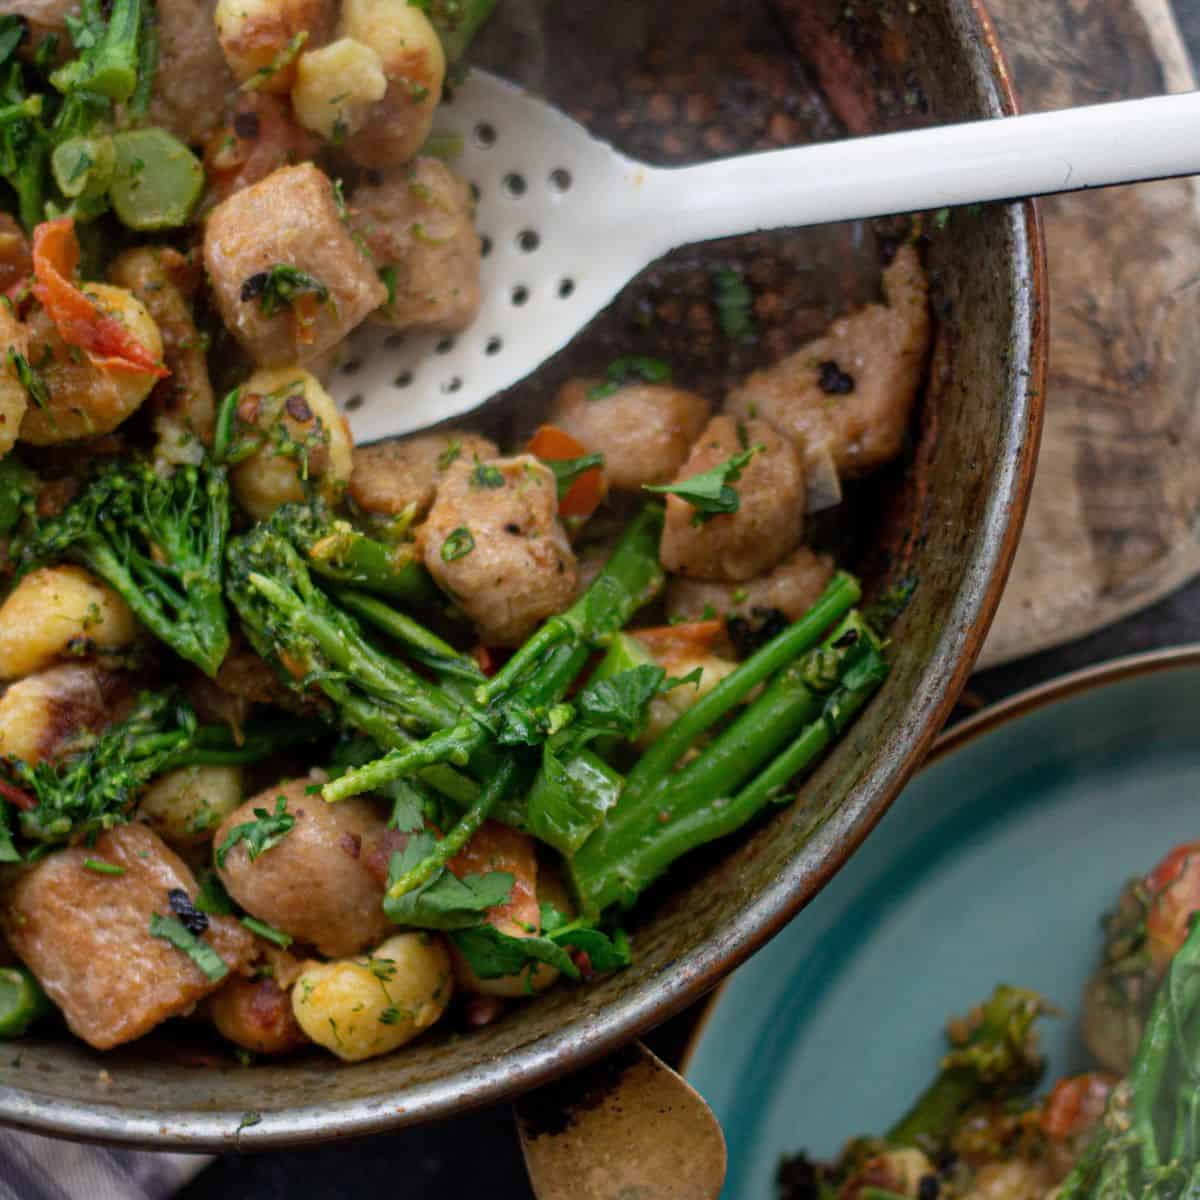 Gnocchi with sausage and broccoli in a pan